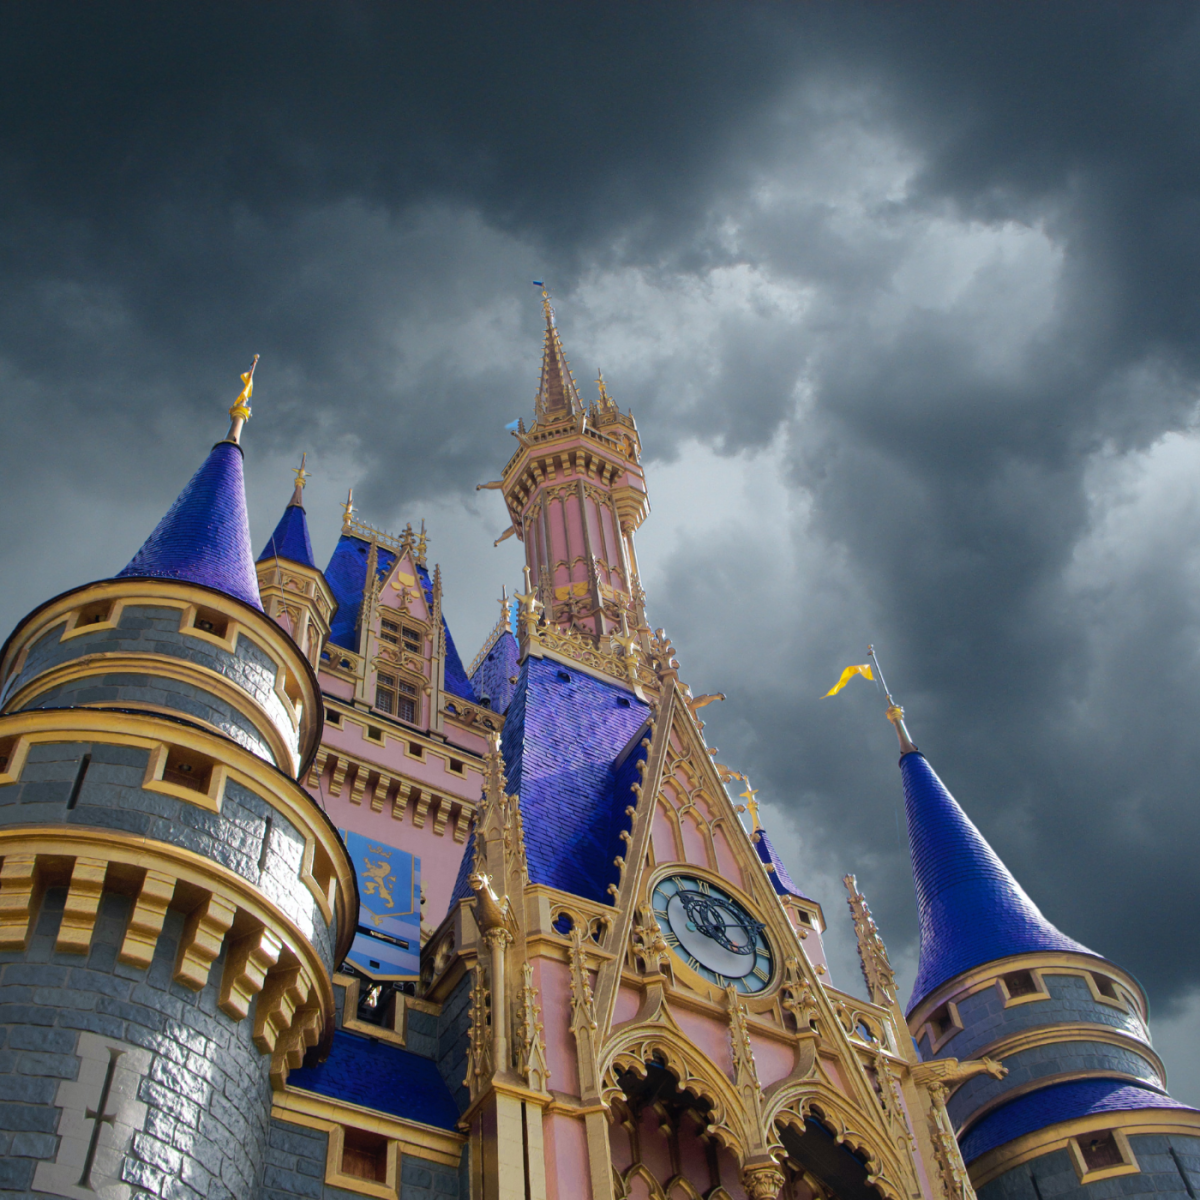 What to Expect at Walt Disney World During a Hurricane